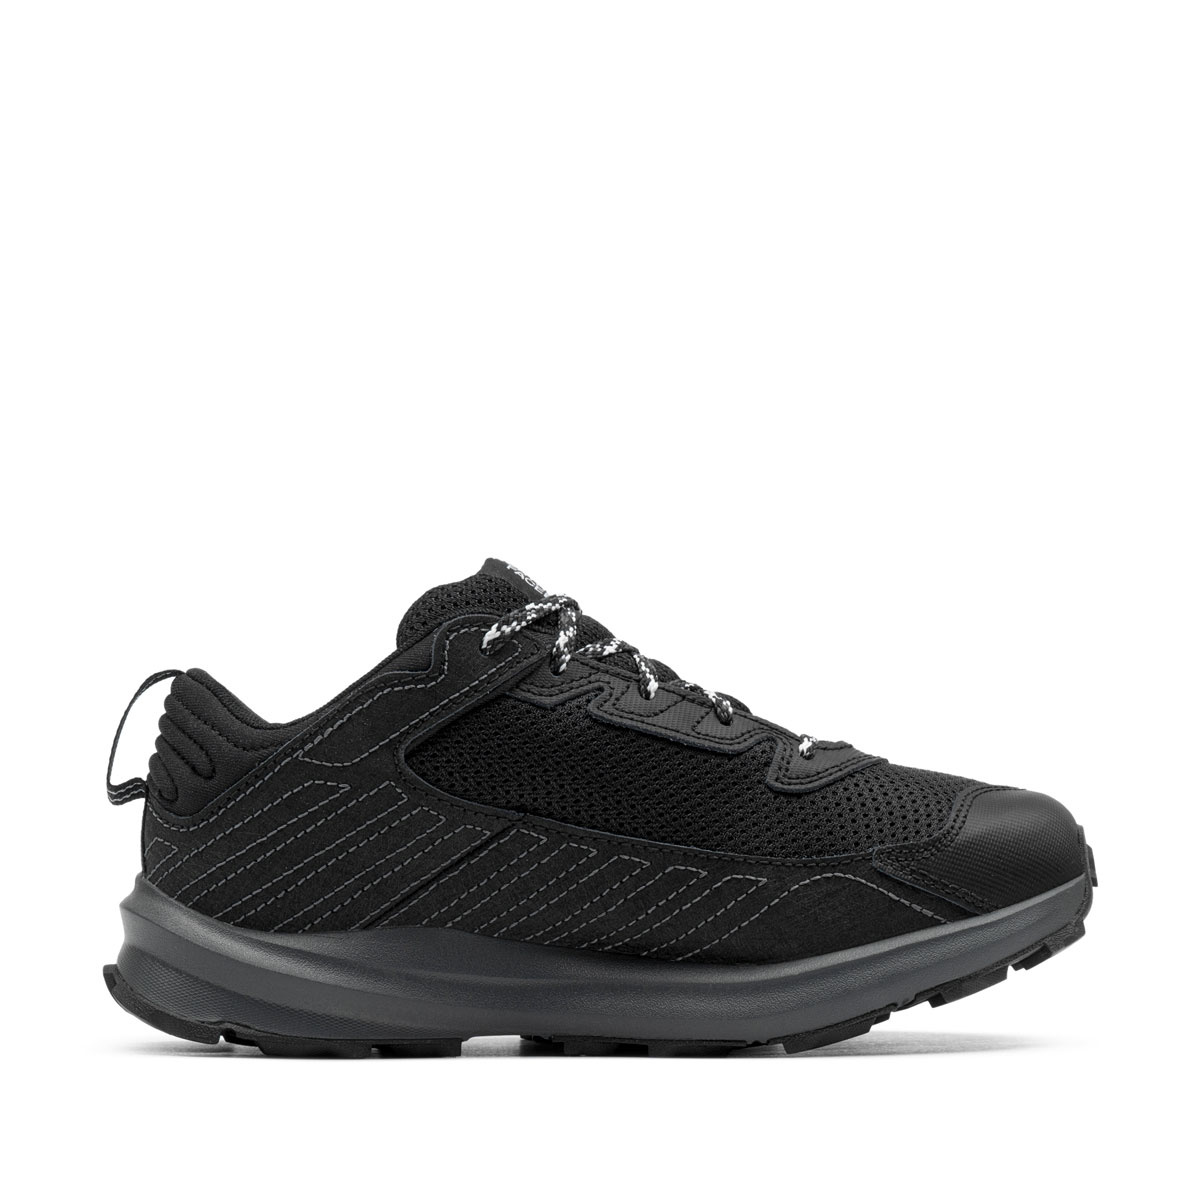 The North Face Fastpack Hiker Waterproof Спортни обувки NF0A5LXGKX7